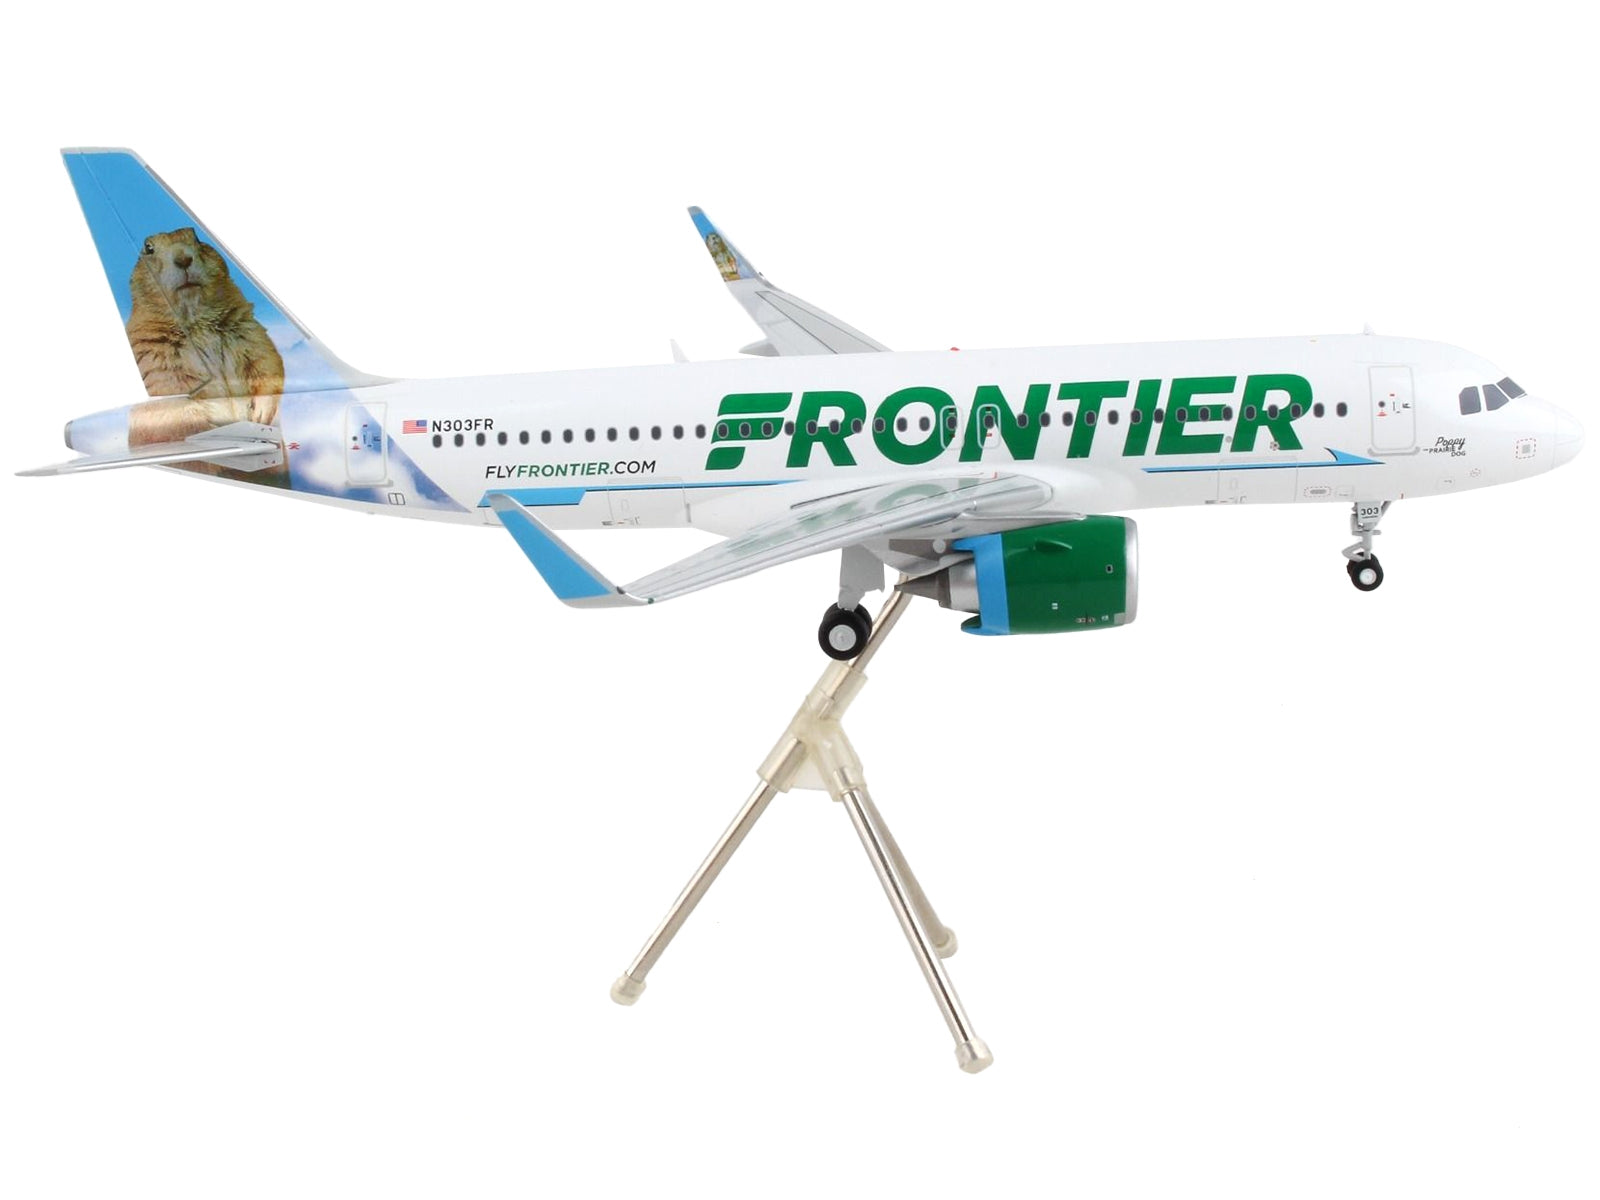 Airbus A320neo Commercial Aircraft "Frontier Airlines - Poppy the Prairie Dog"